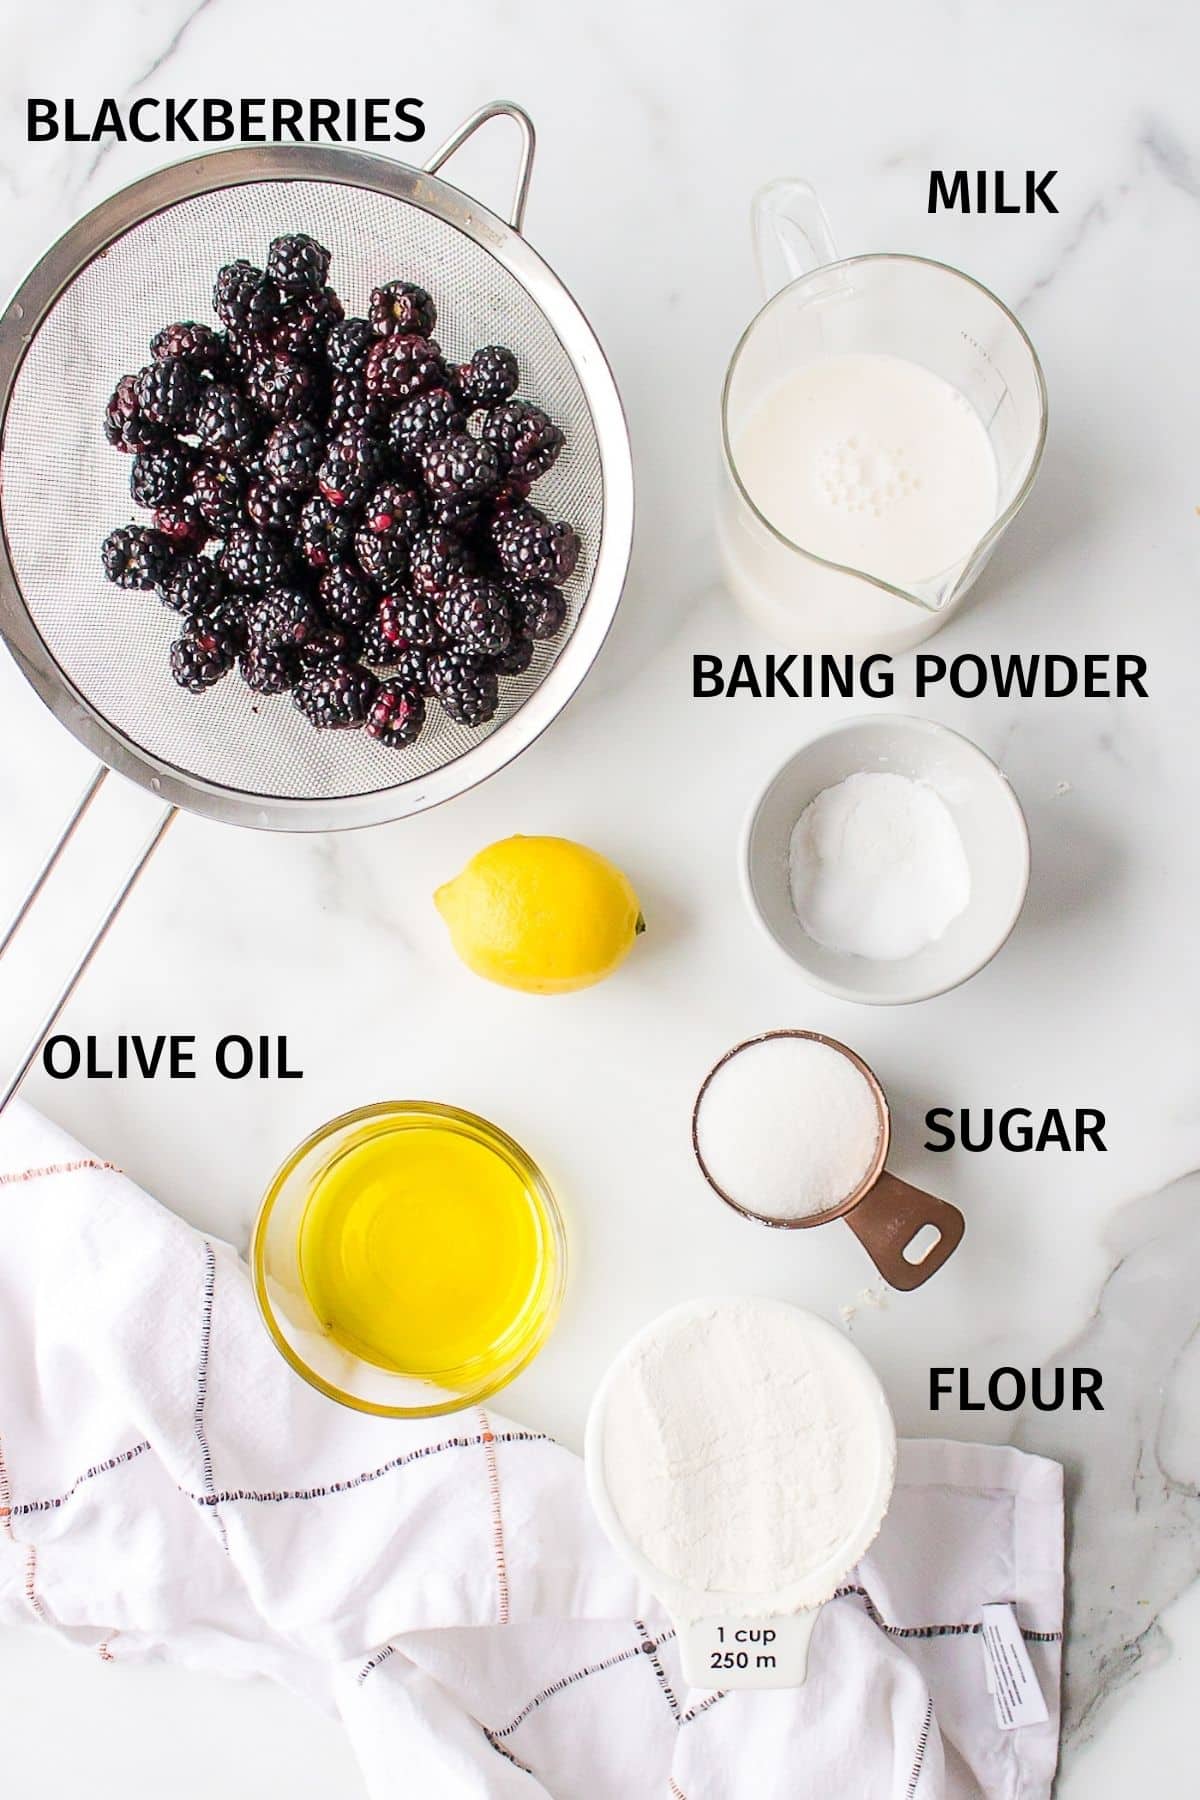 Ingredients for vegan blackberry muffins in small bowls on a white surface.